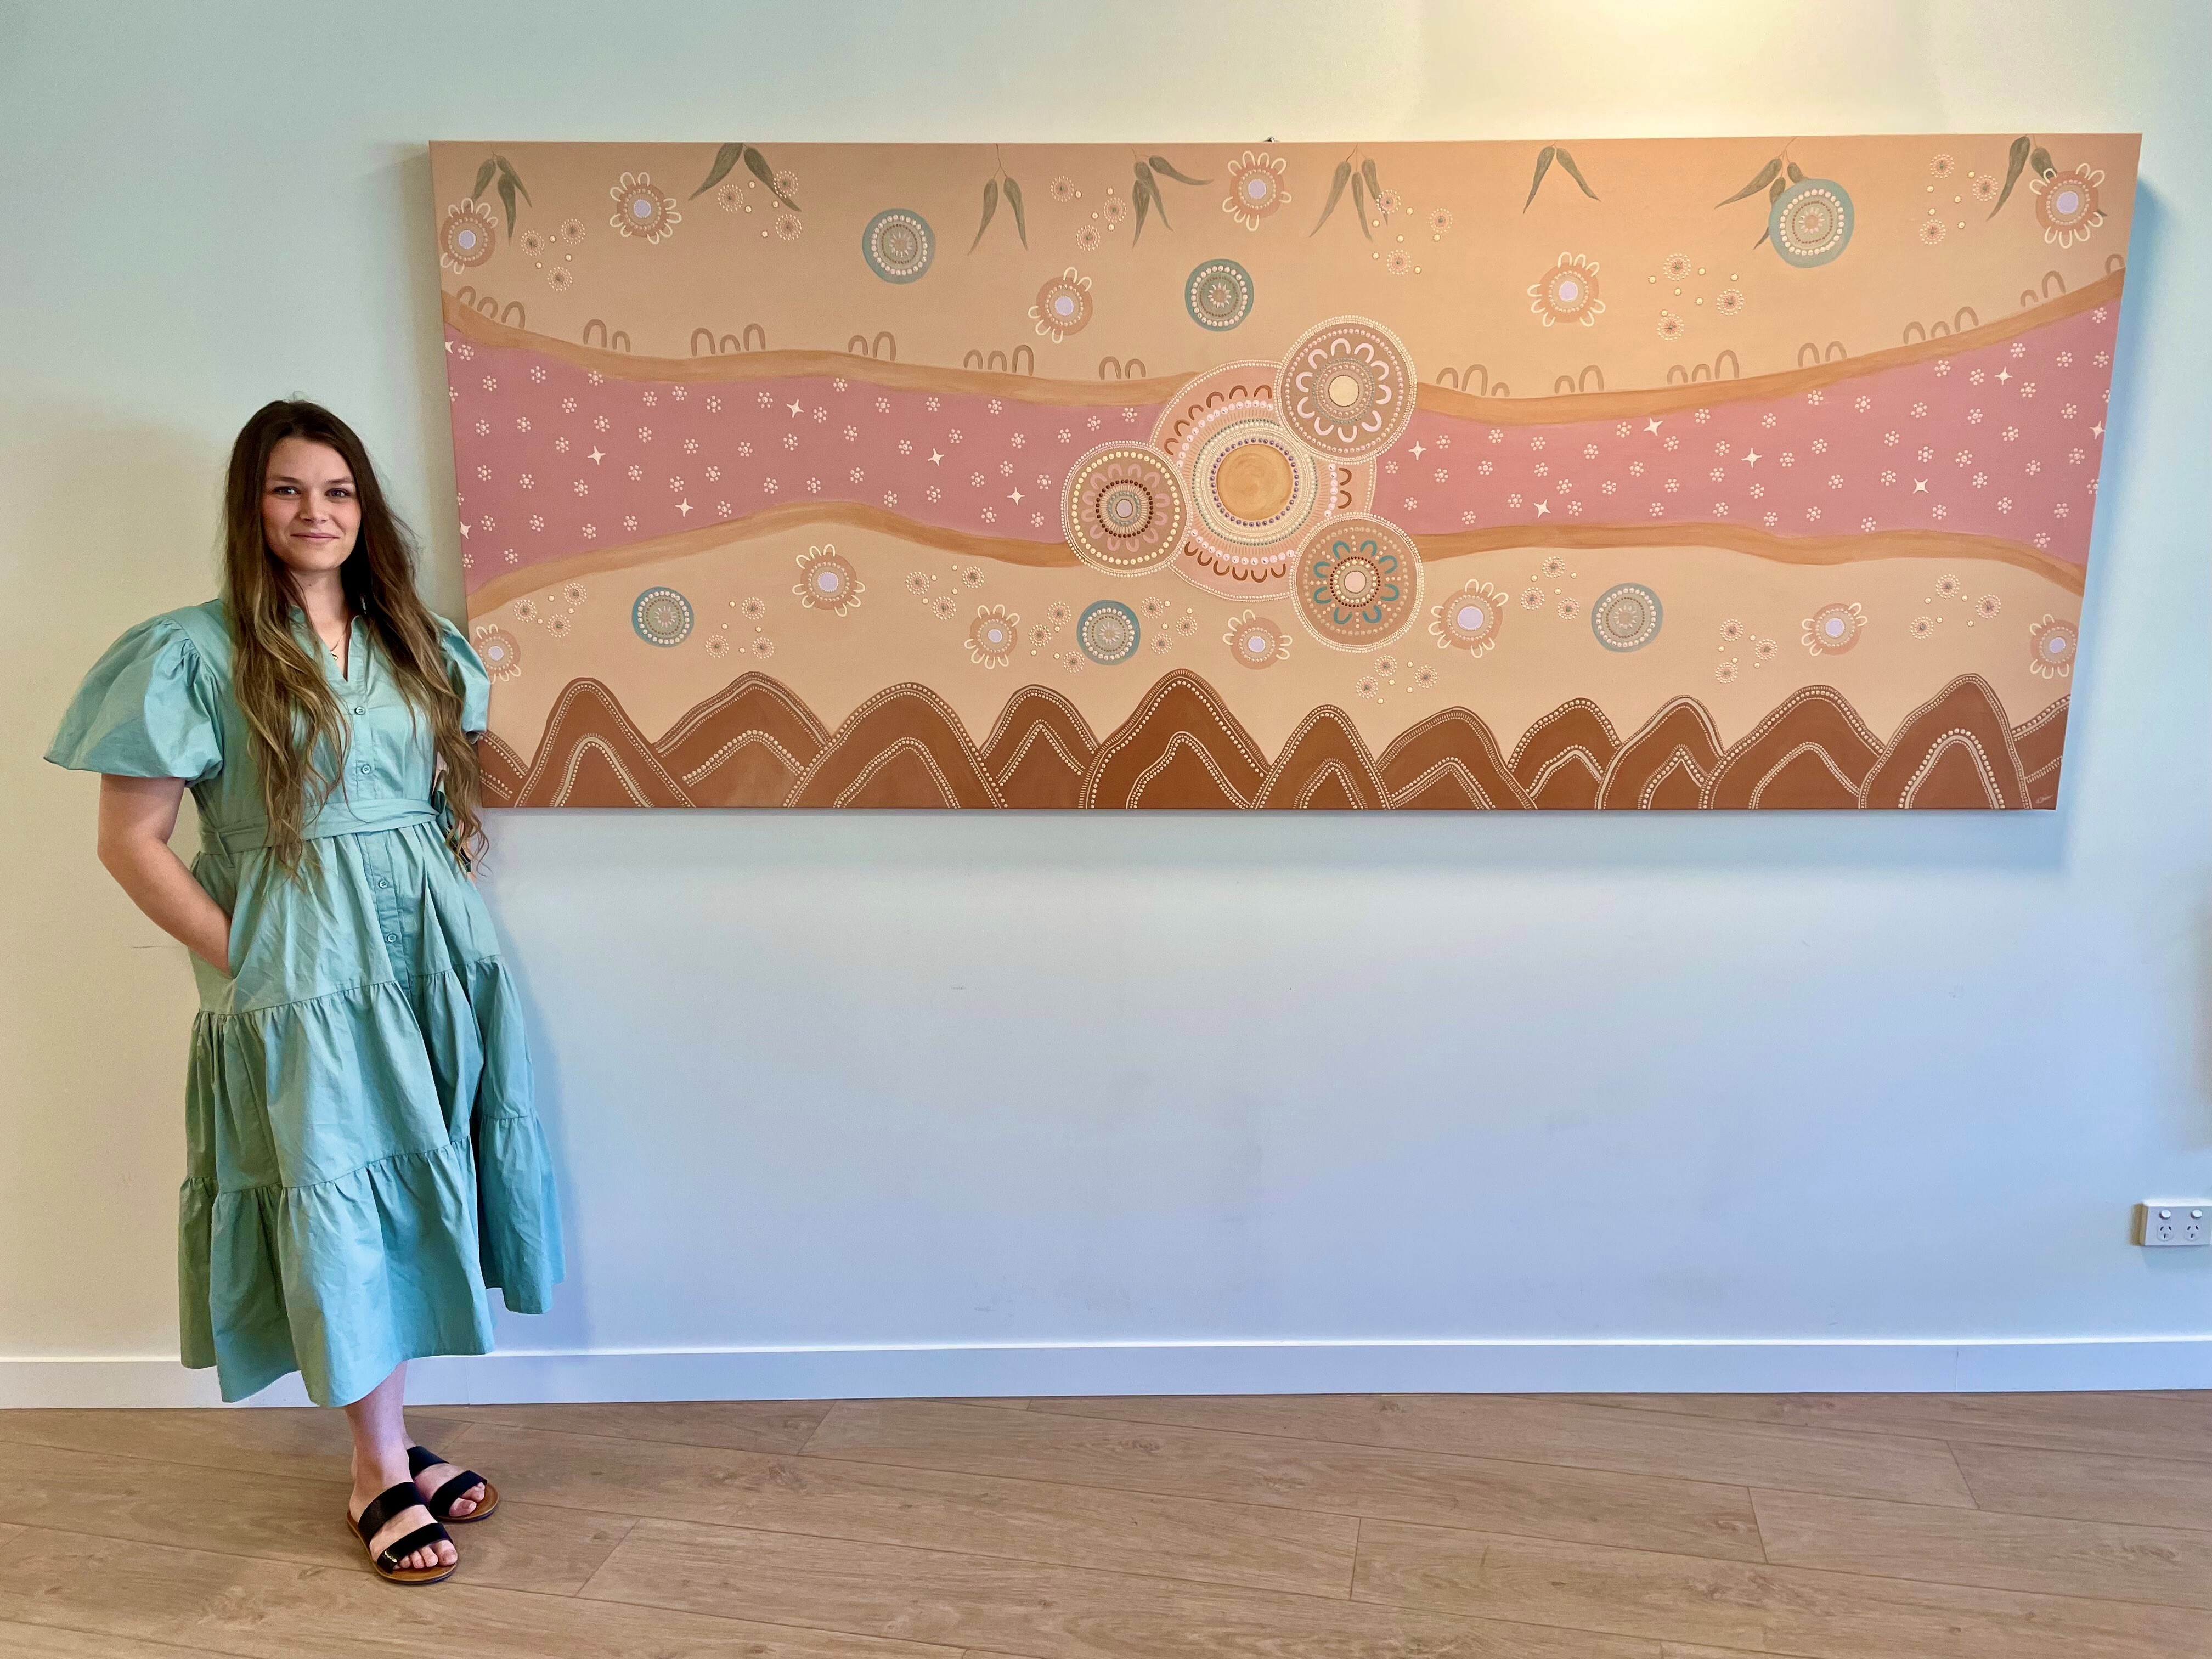 Artist Kyralee Shields pictured with her artwork "Gimbawali"